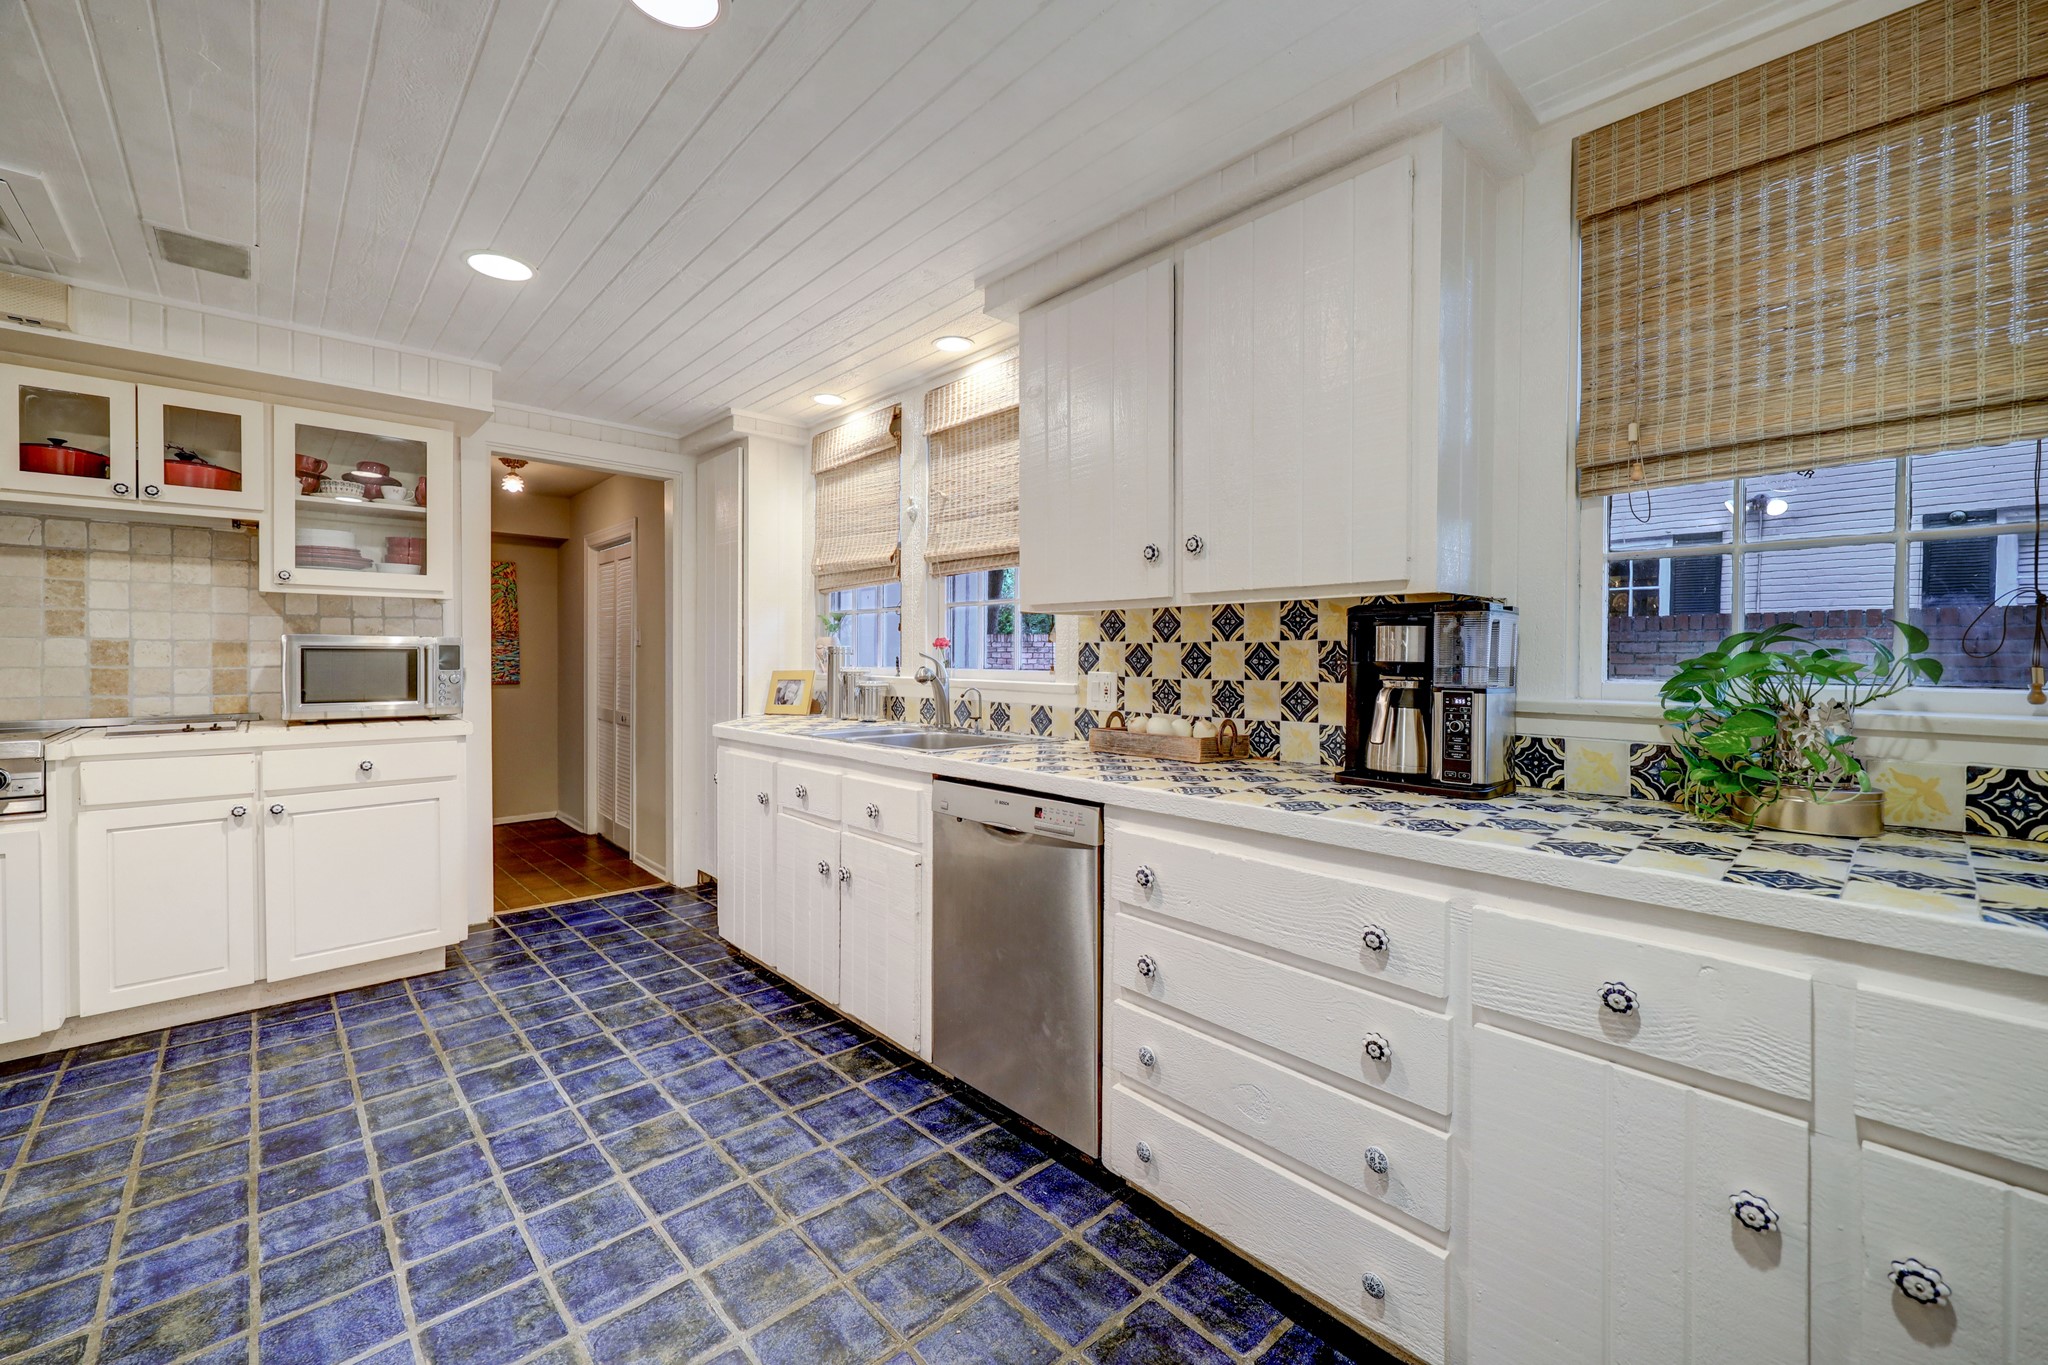 Kitchen with tile floor and ship lap ceiling, vintage Mexican tile on the countertop and backsplash.